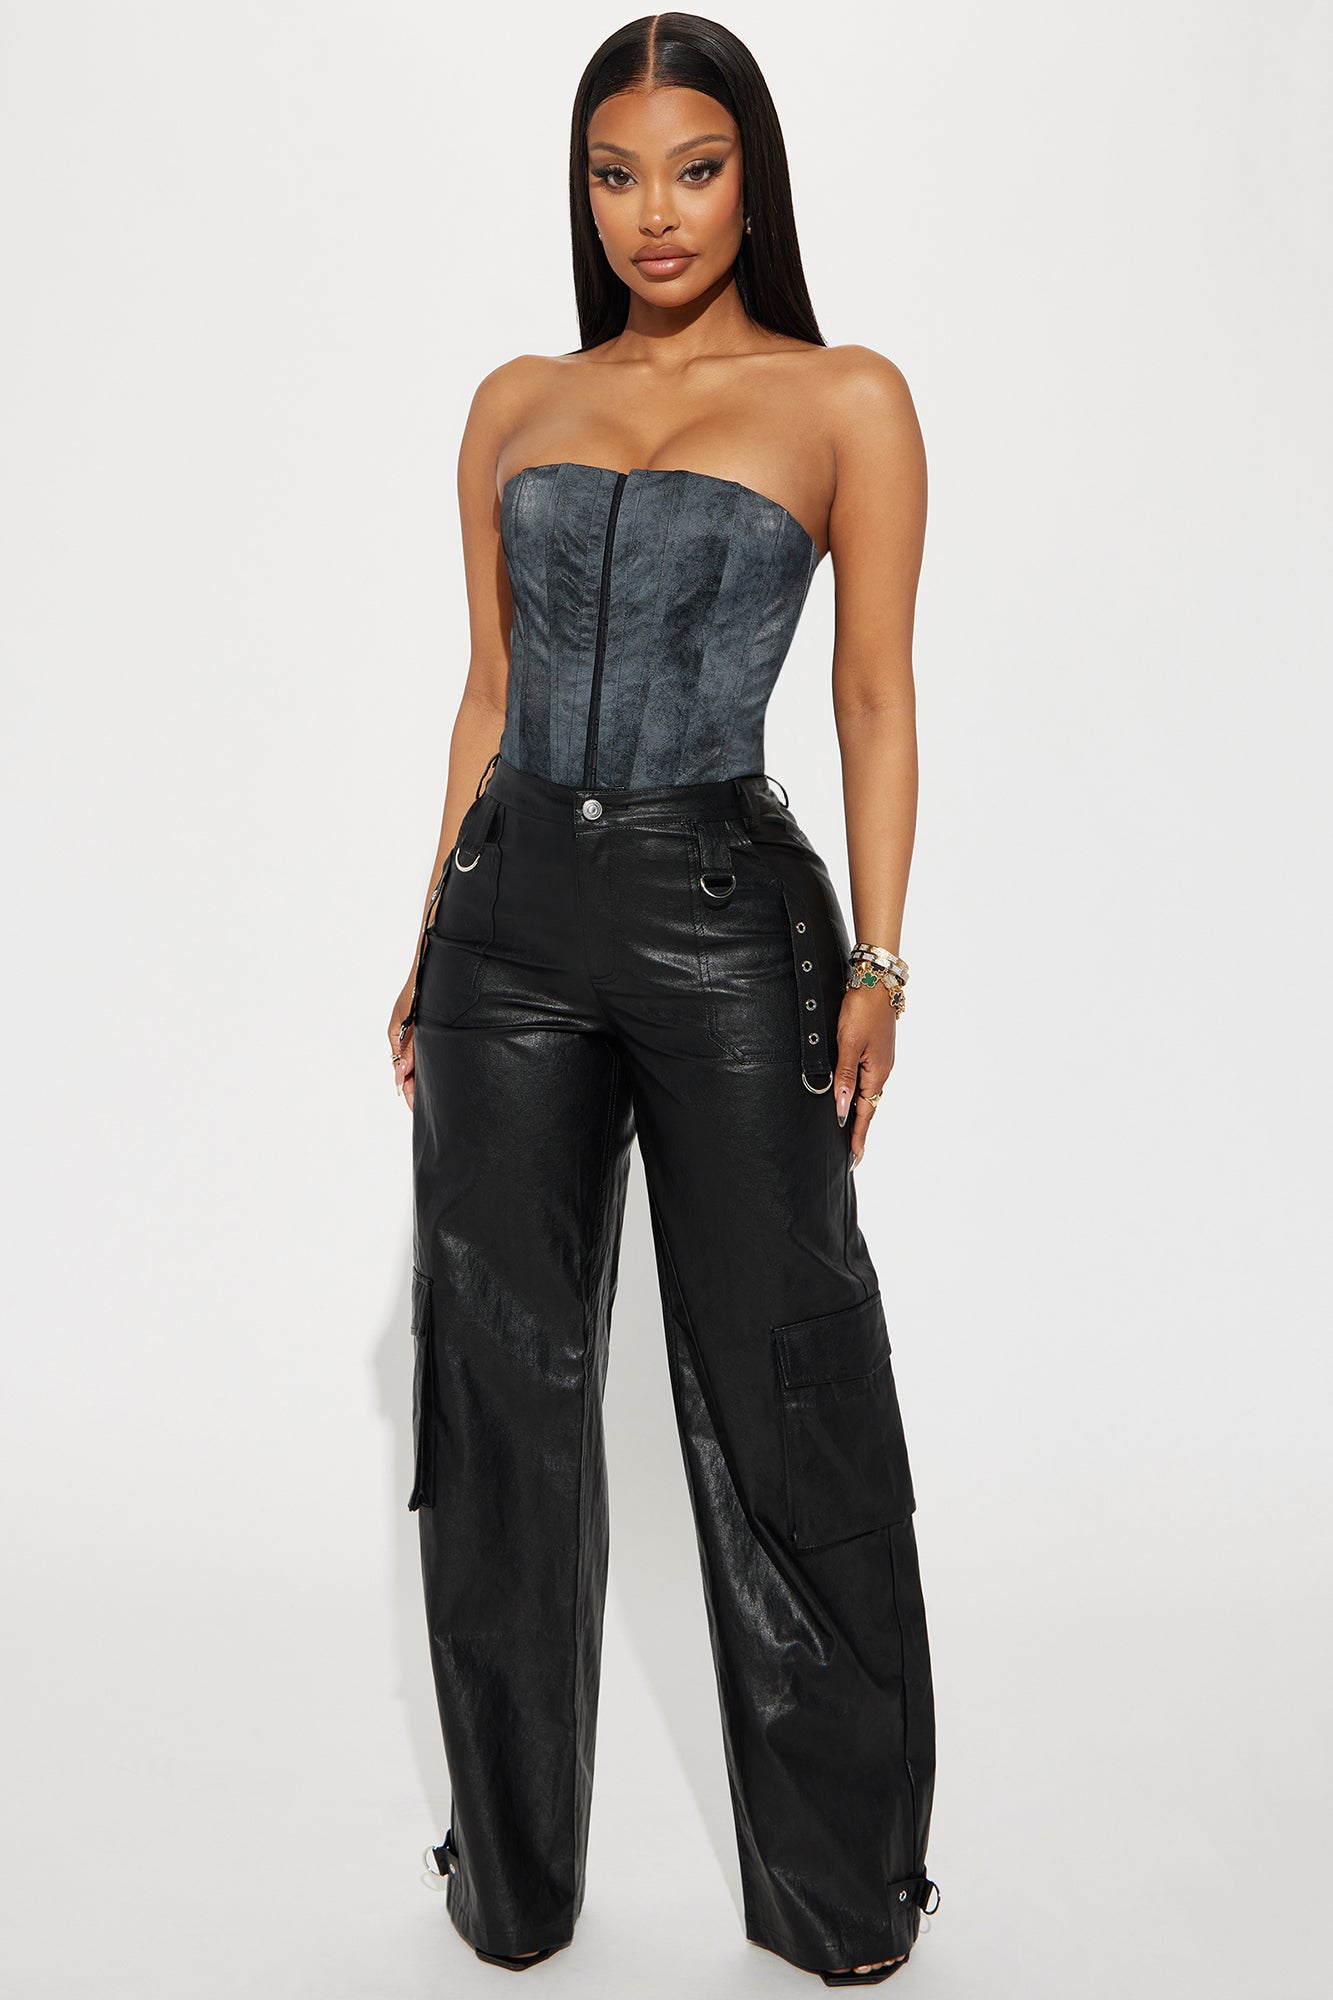 Bring The Action Faux Leather Pant - Black